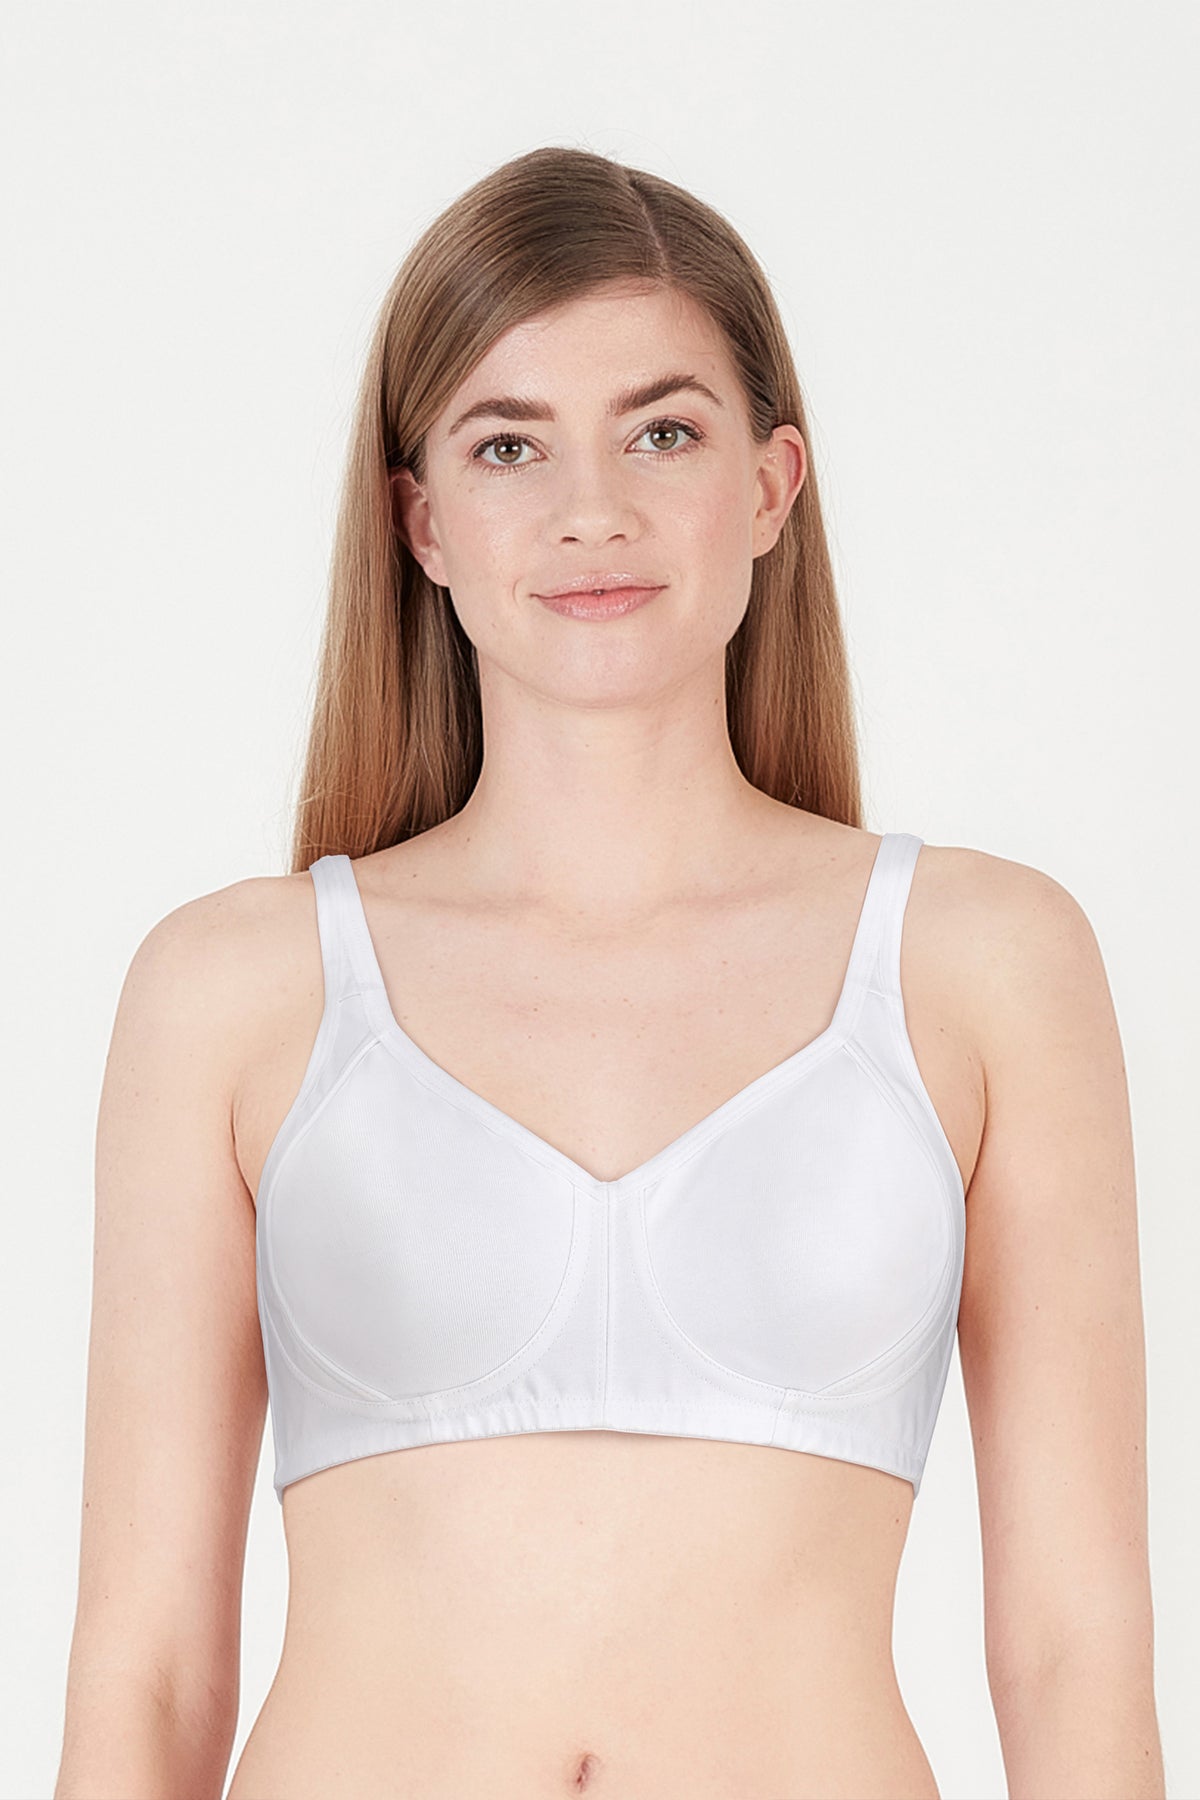 BLS - Calantha Non Wired And Non Padded Cotton Bra - White